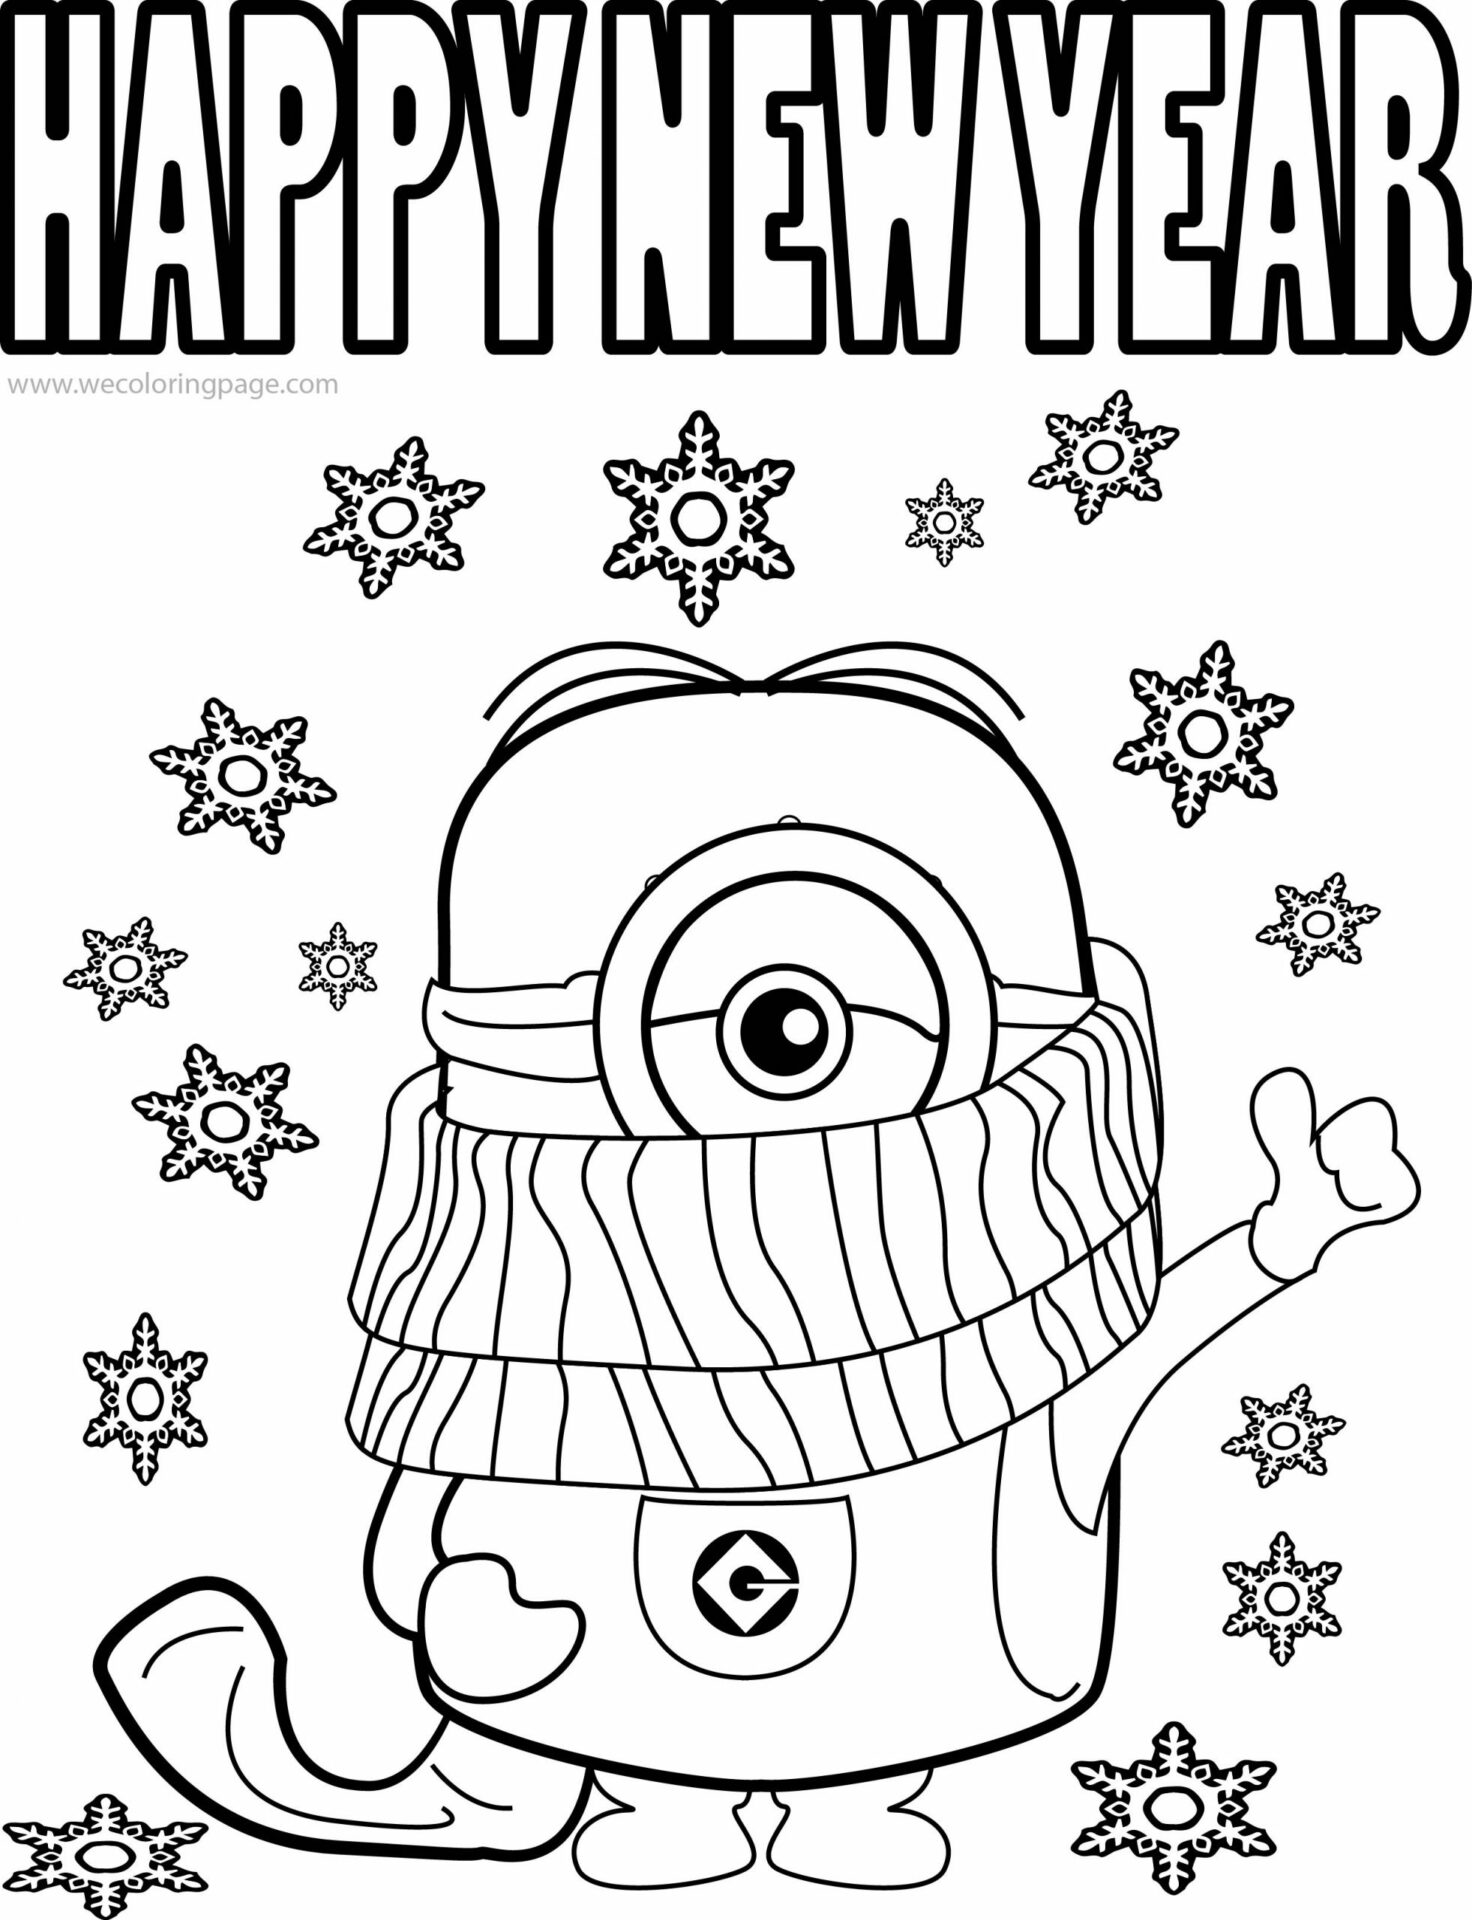 1546397167_new-year-coloring-pages-picture